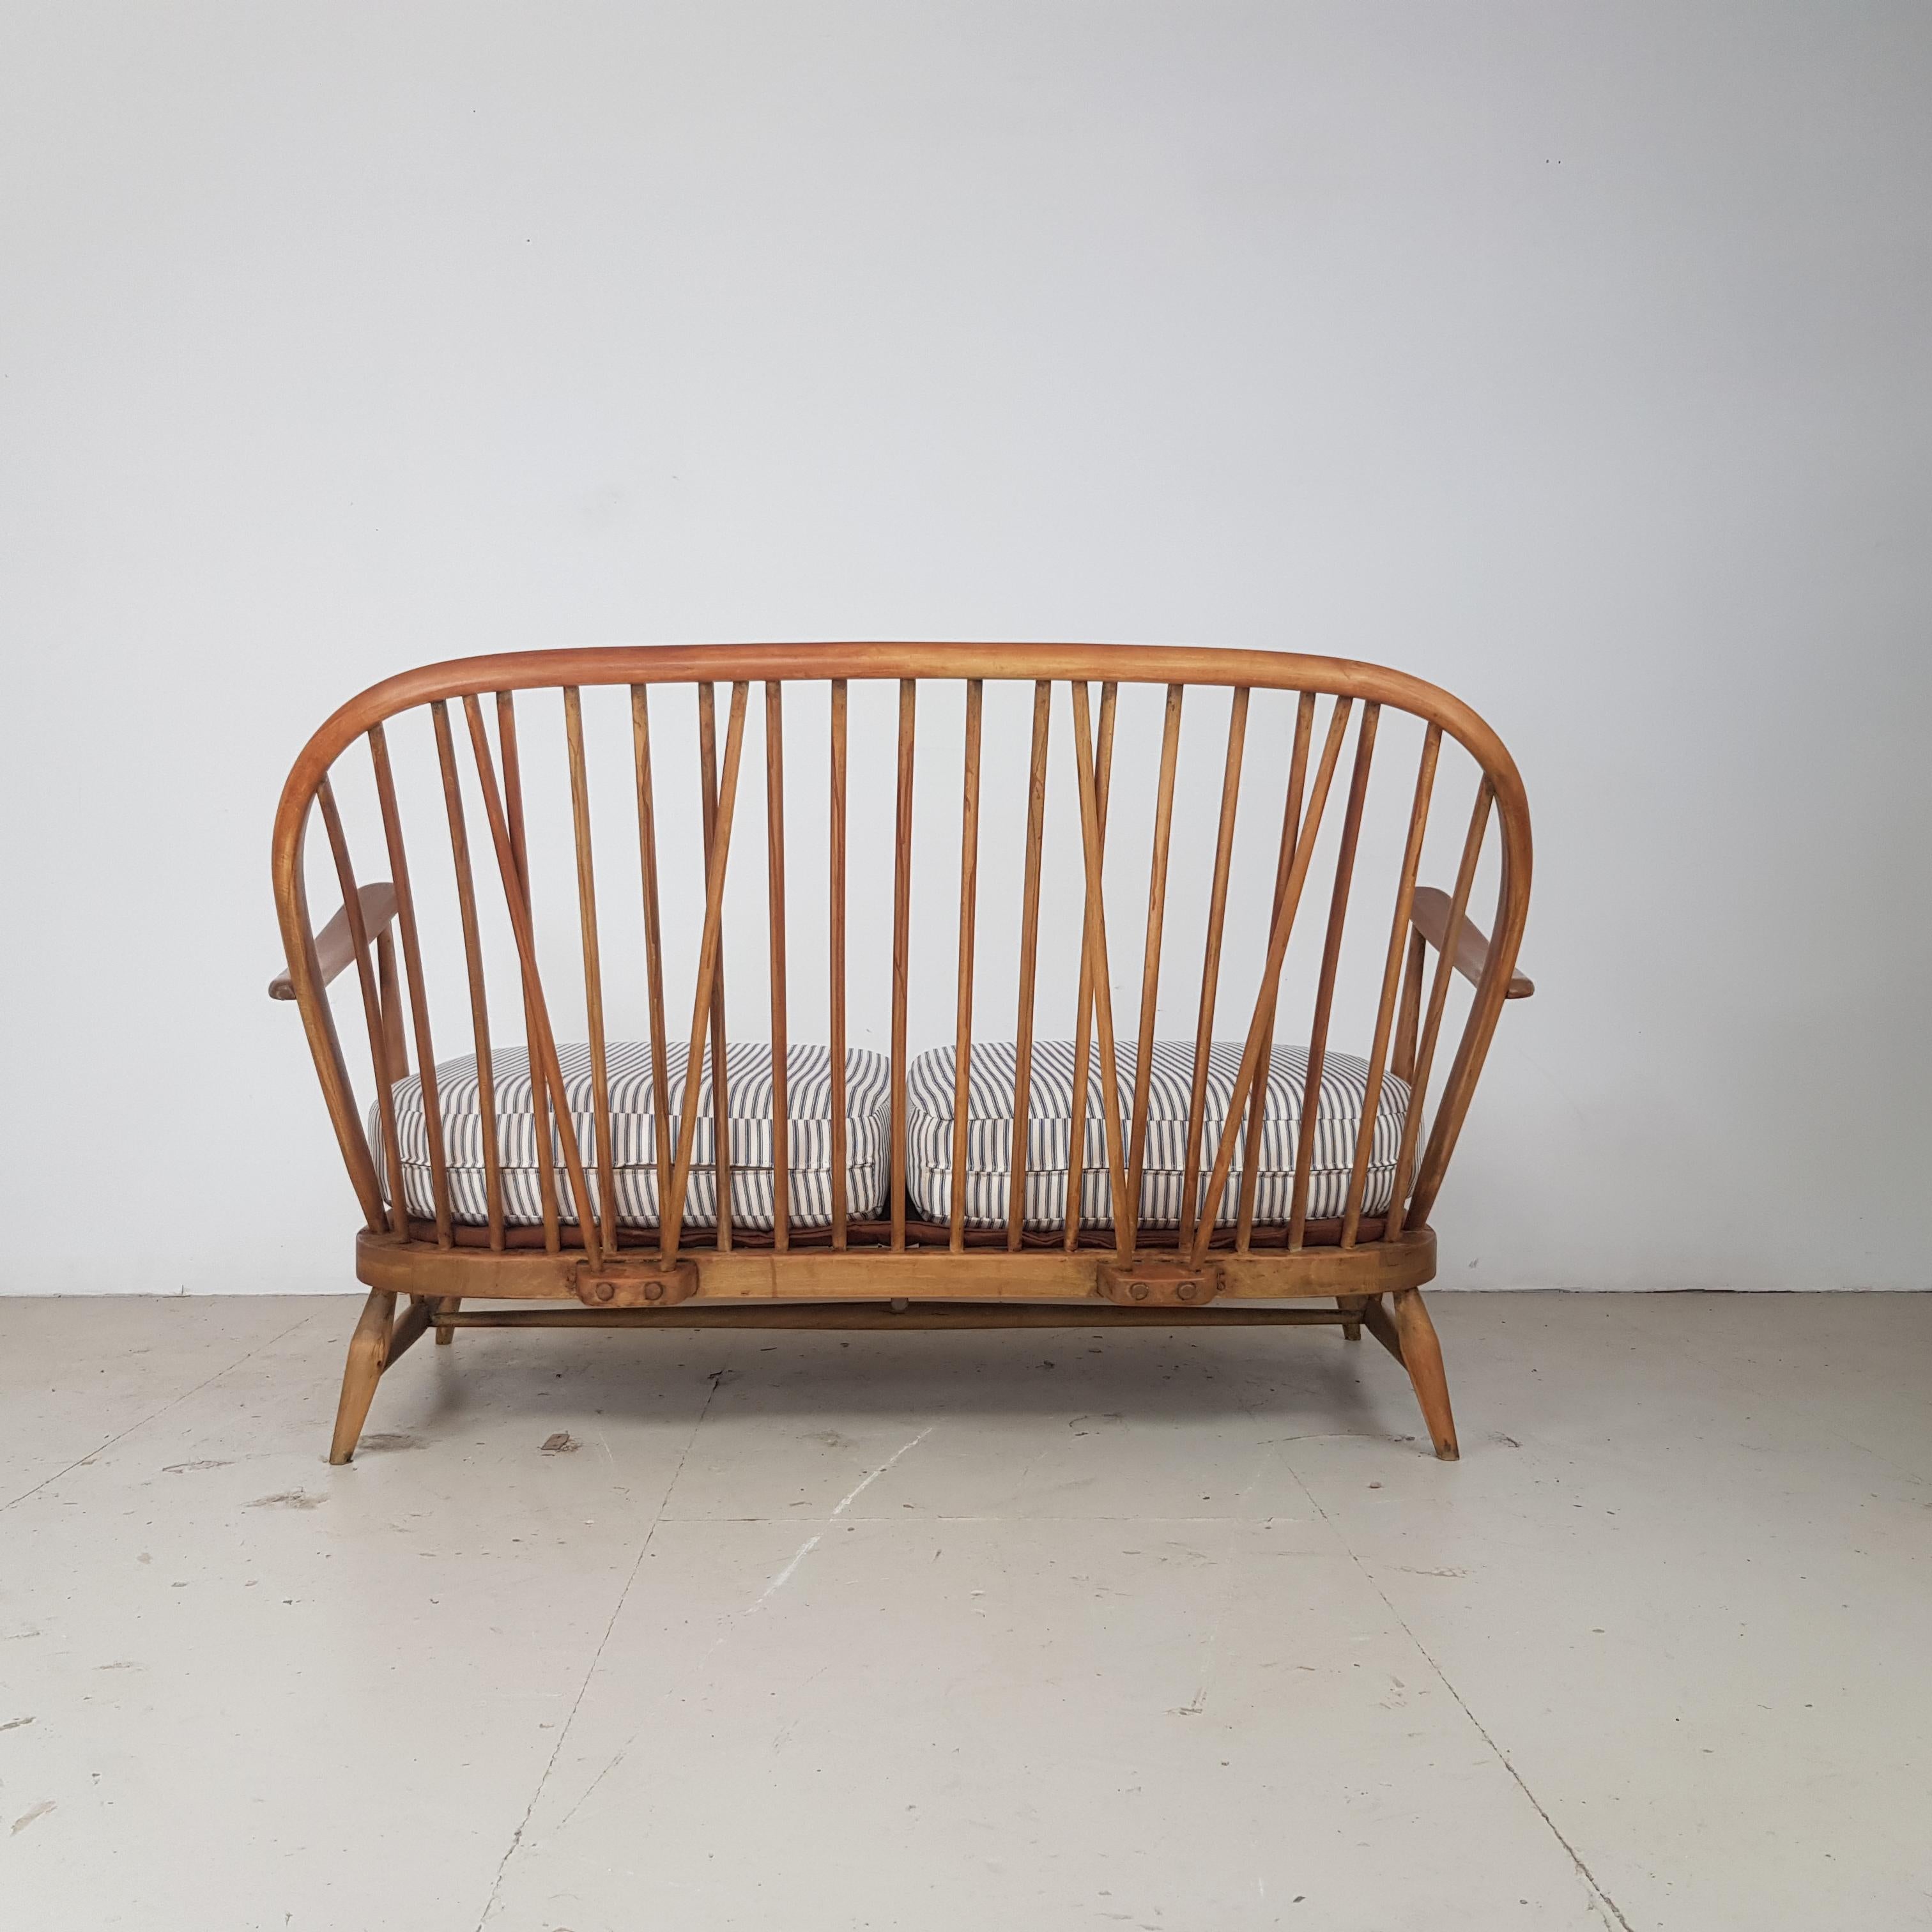 Elm Refurbished Vintage Ercol Windsor Two-Seat Sofa Upholstered in French Ticking